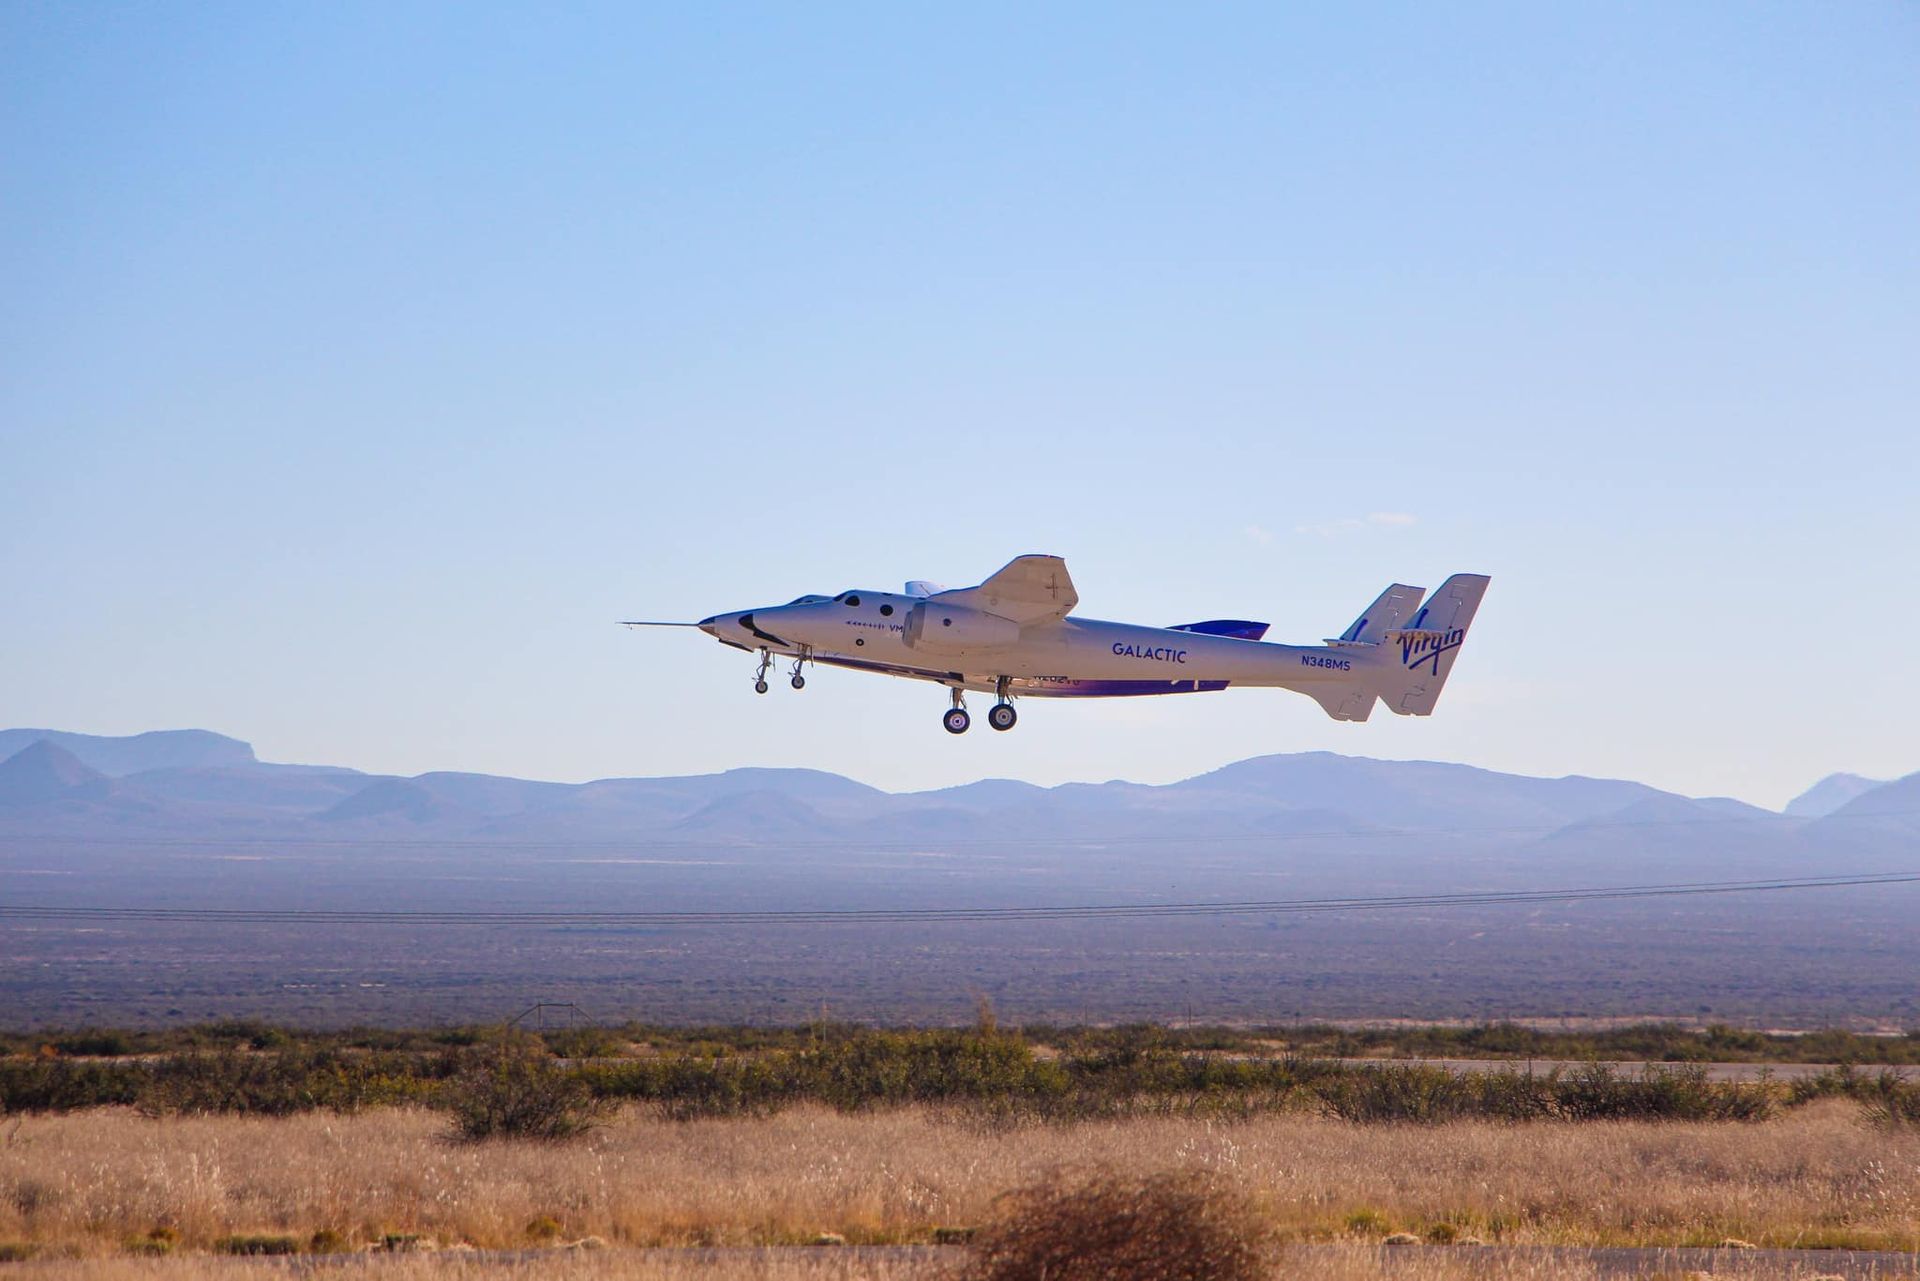 
World's First Purpose-Built Commercial Spaceport, world record in New Mexico